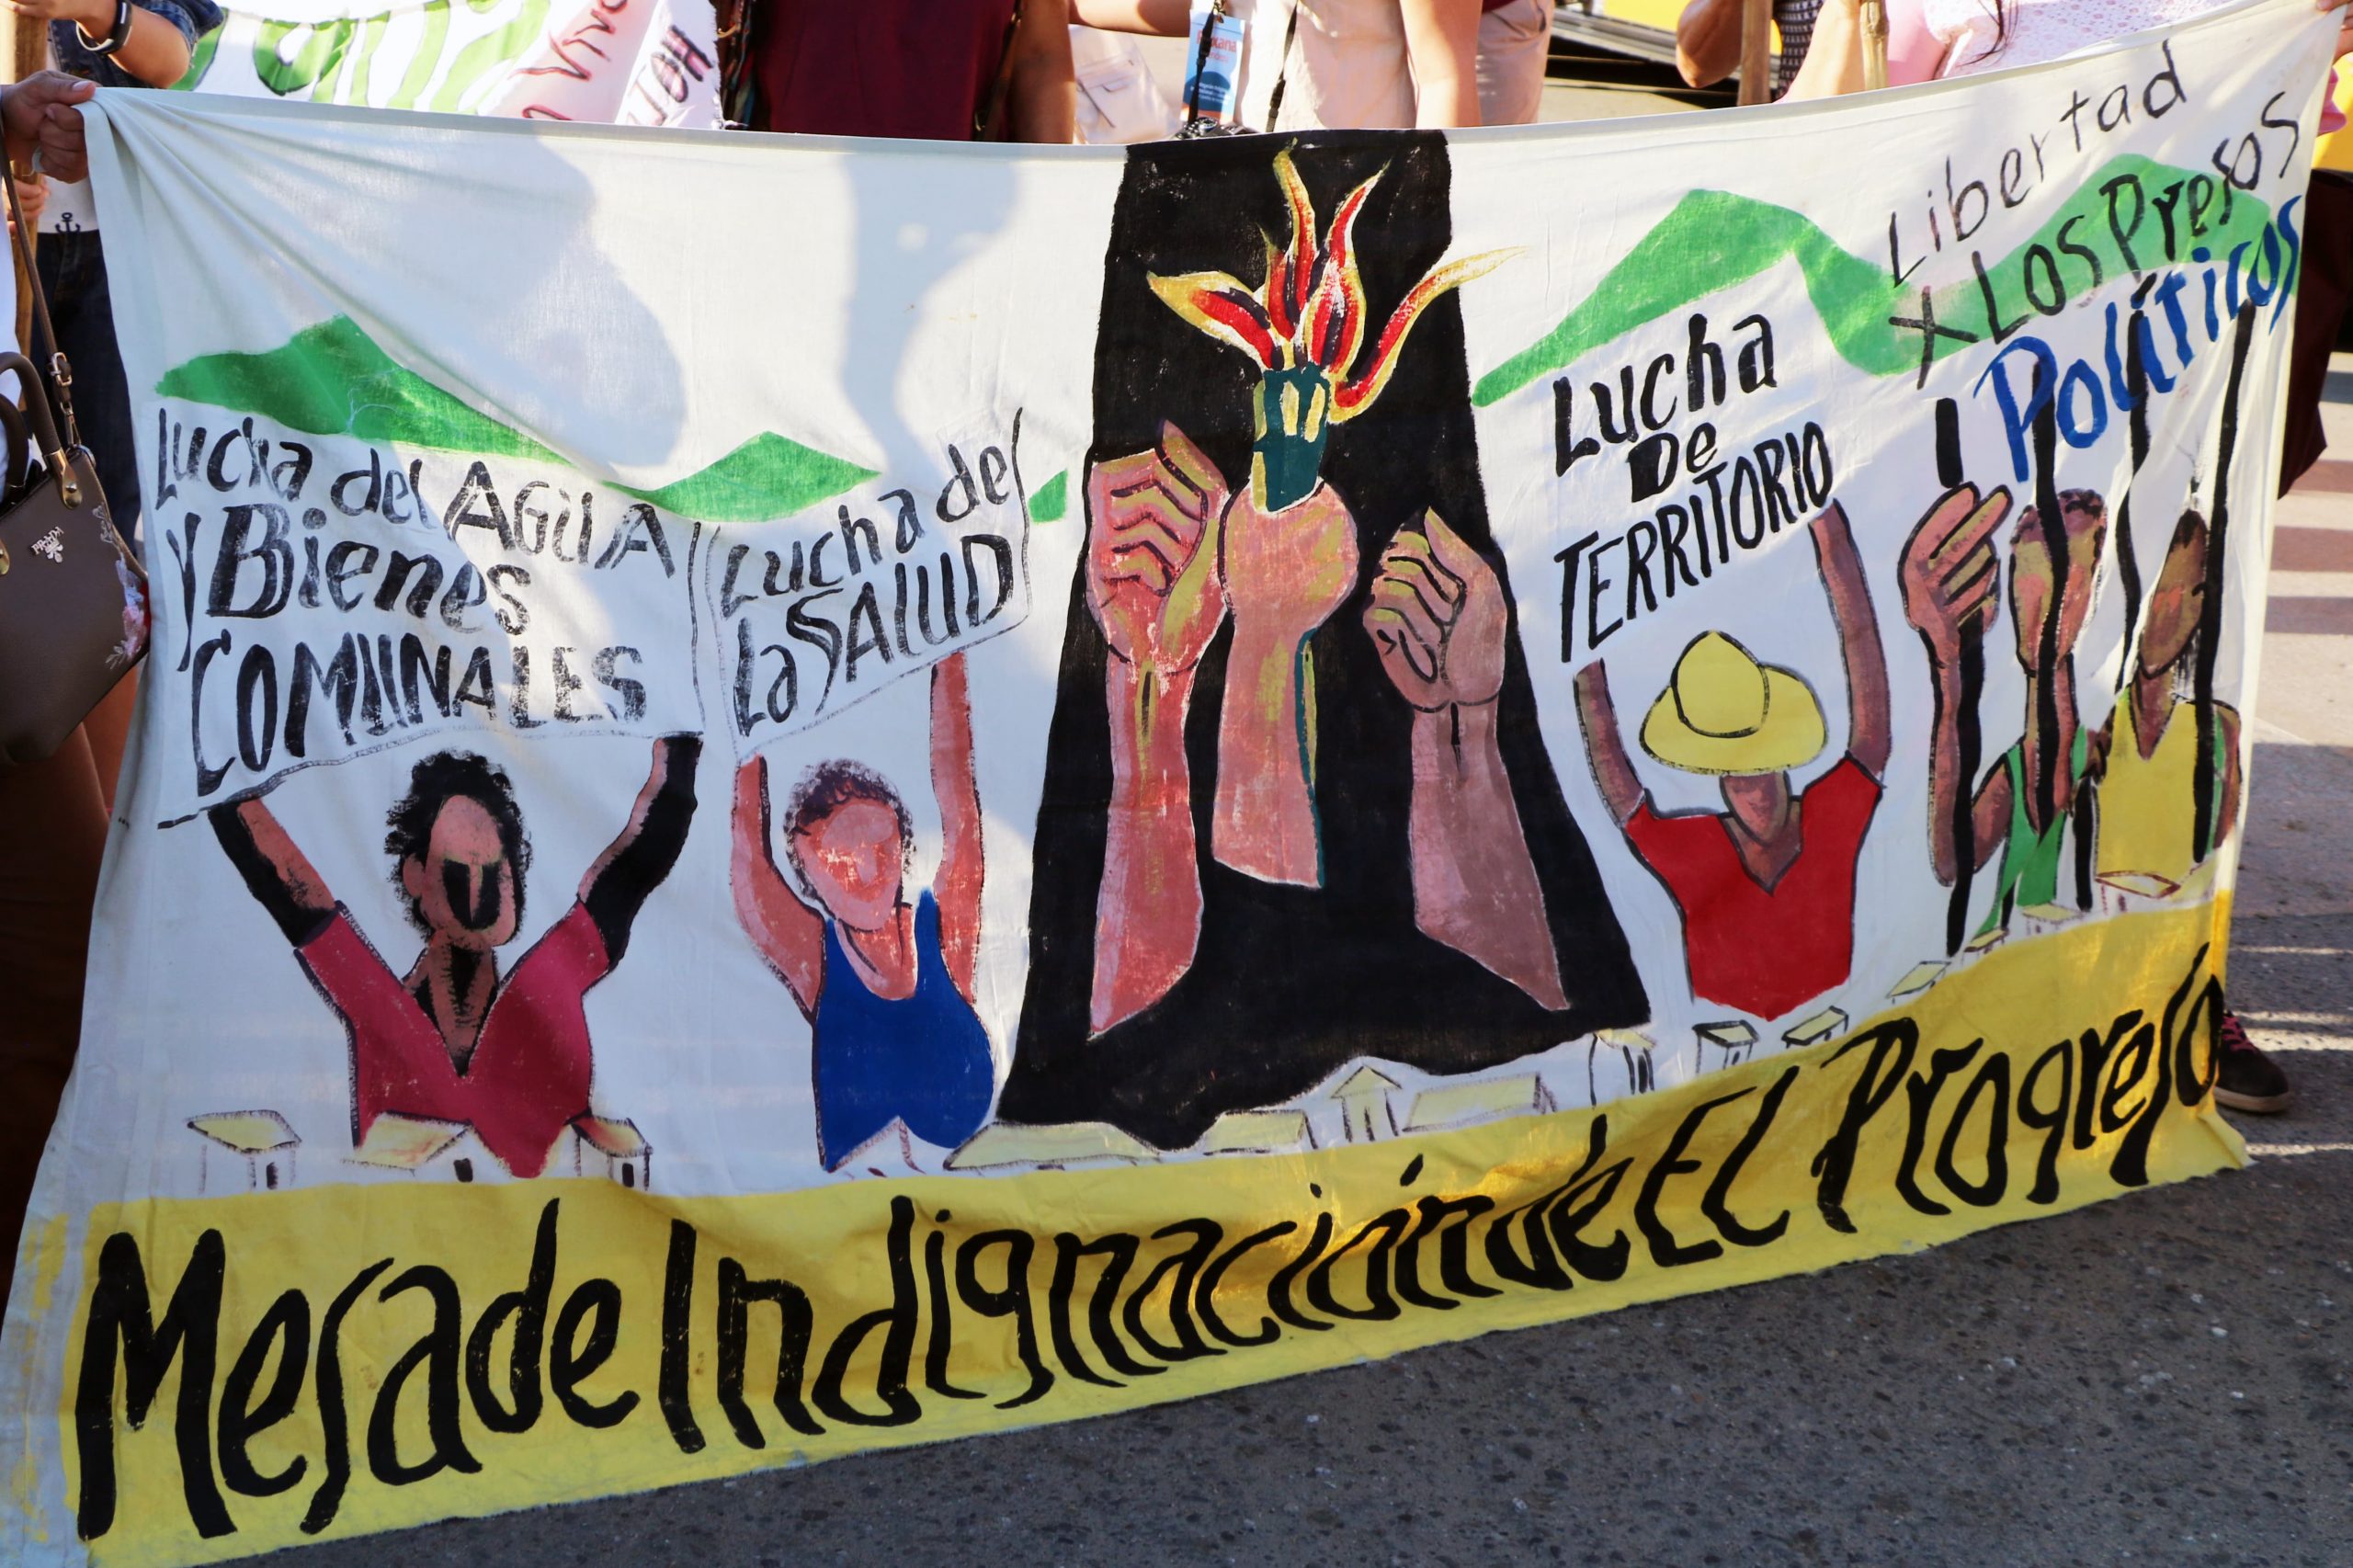 A banner during a protest features phrases like: Free the political prisoners, fight for the land, fight for water and community resources.